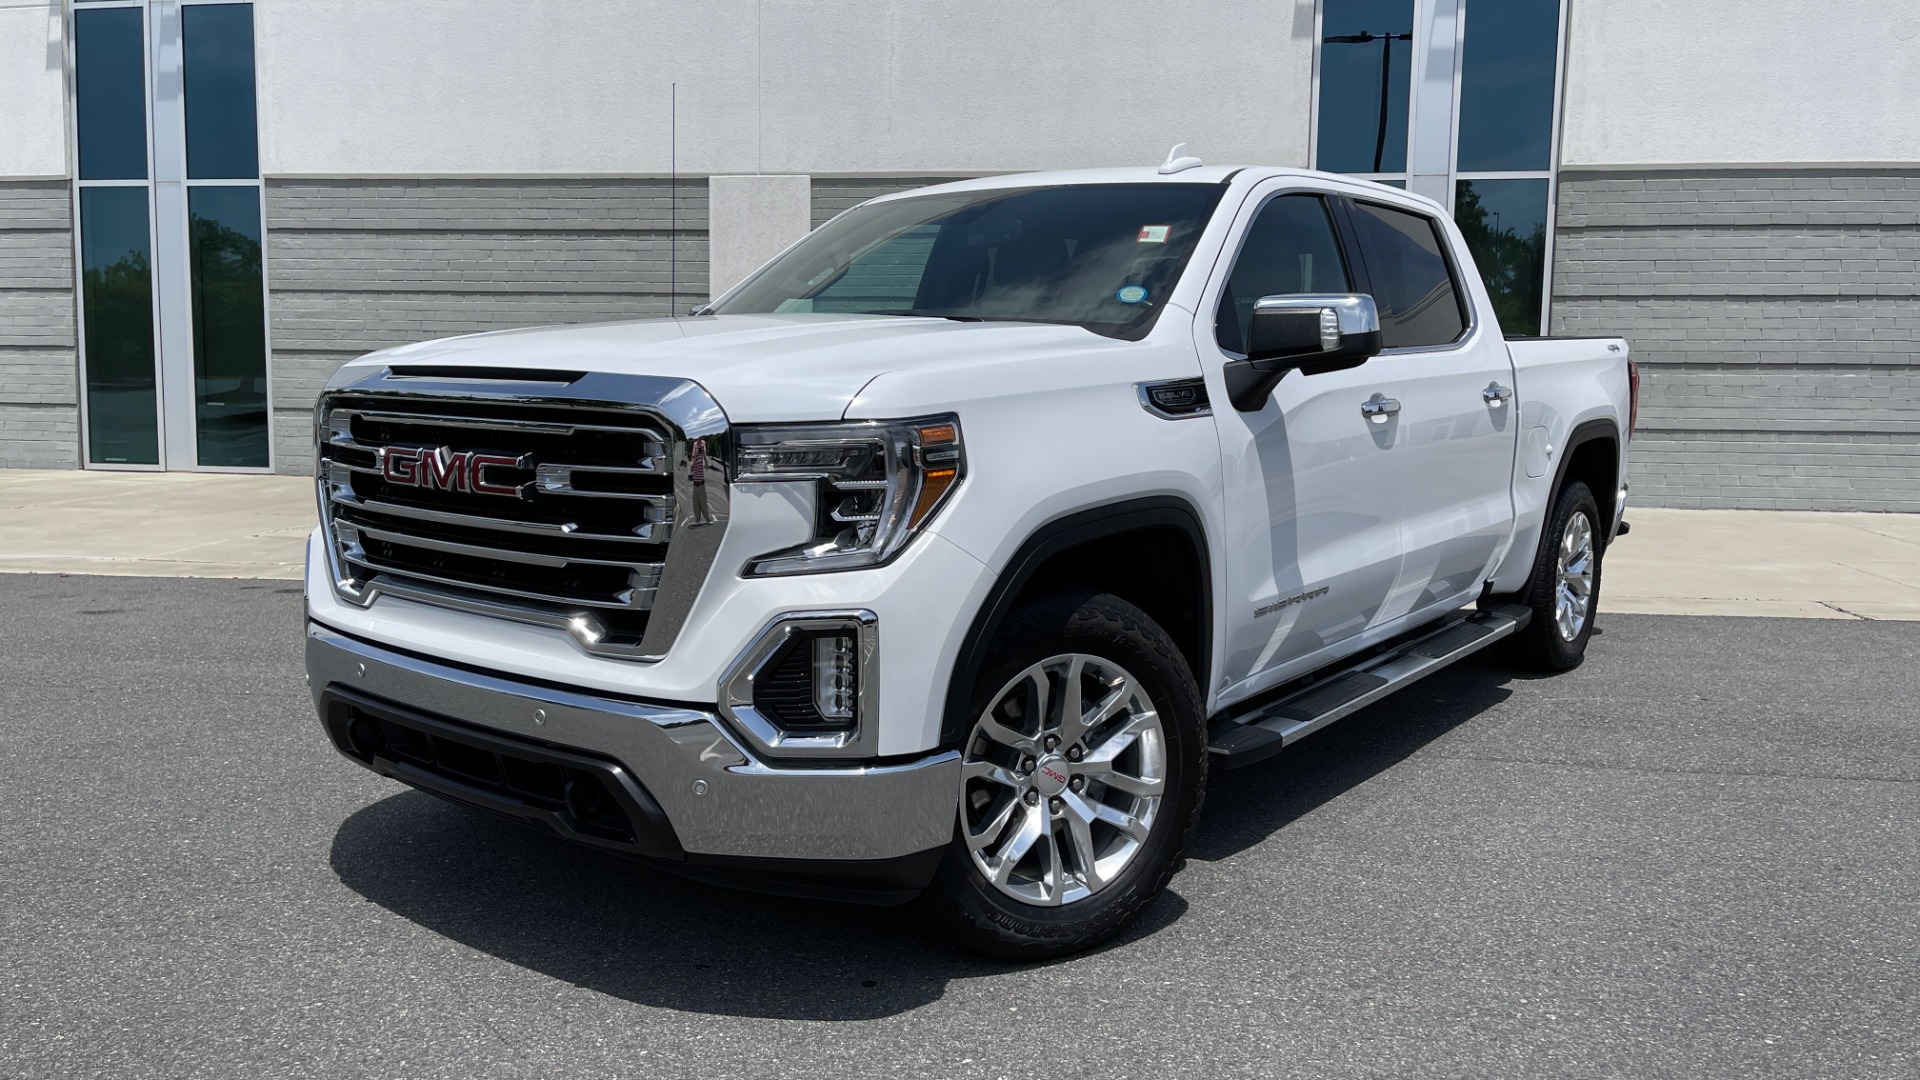 Used 2019 GMC SIERRA 1500 SLT 4X4 CREWCAB / 5.3L V8 / 8-SPD AUTO / NAV / BOSE / REARVIEW for sale Sold at Formula Imports in Charlotte NC 28227 1